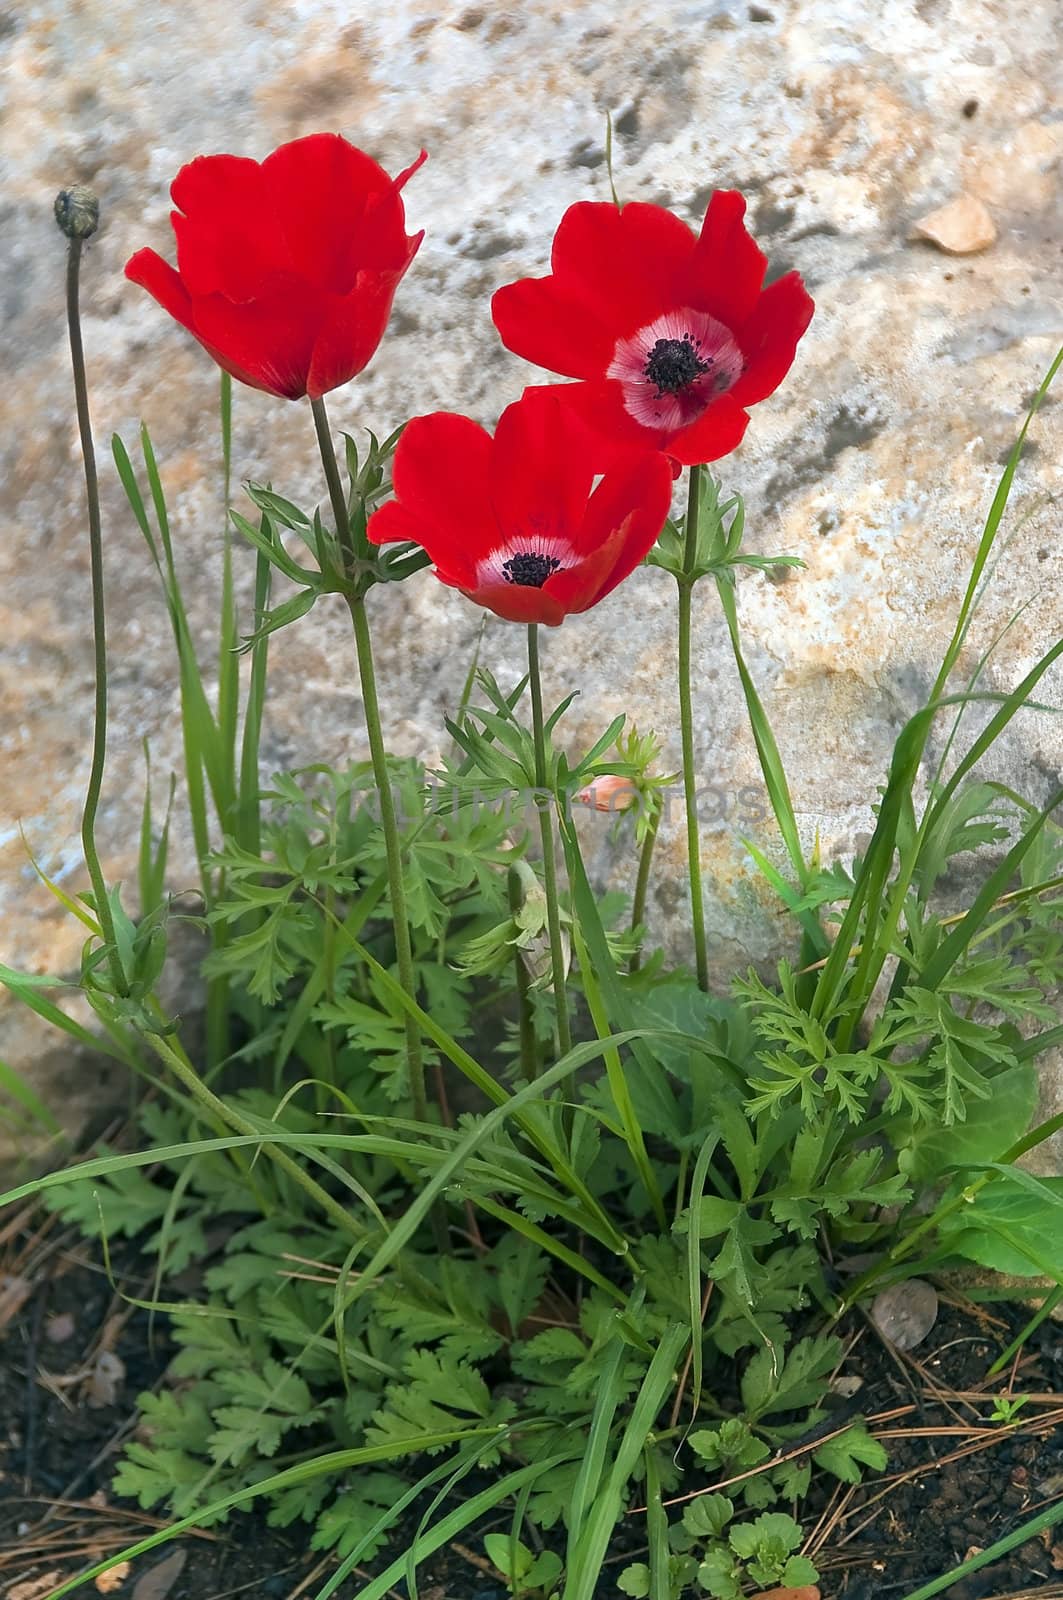 three wild red poppies among the rocks